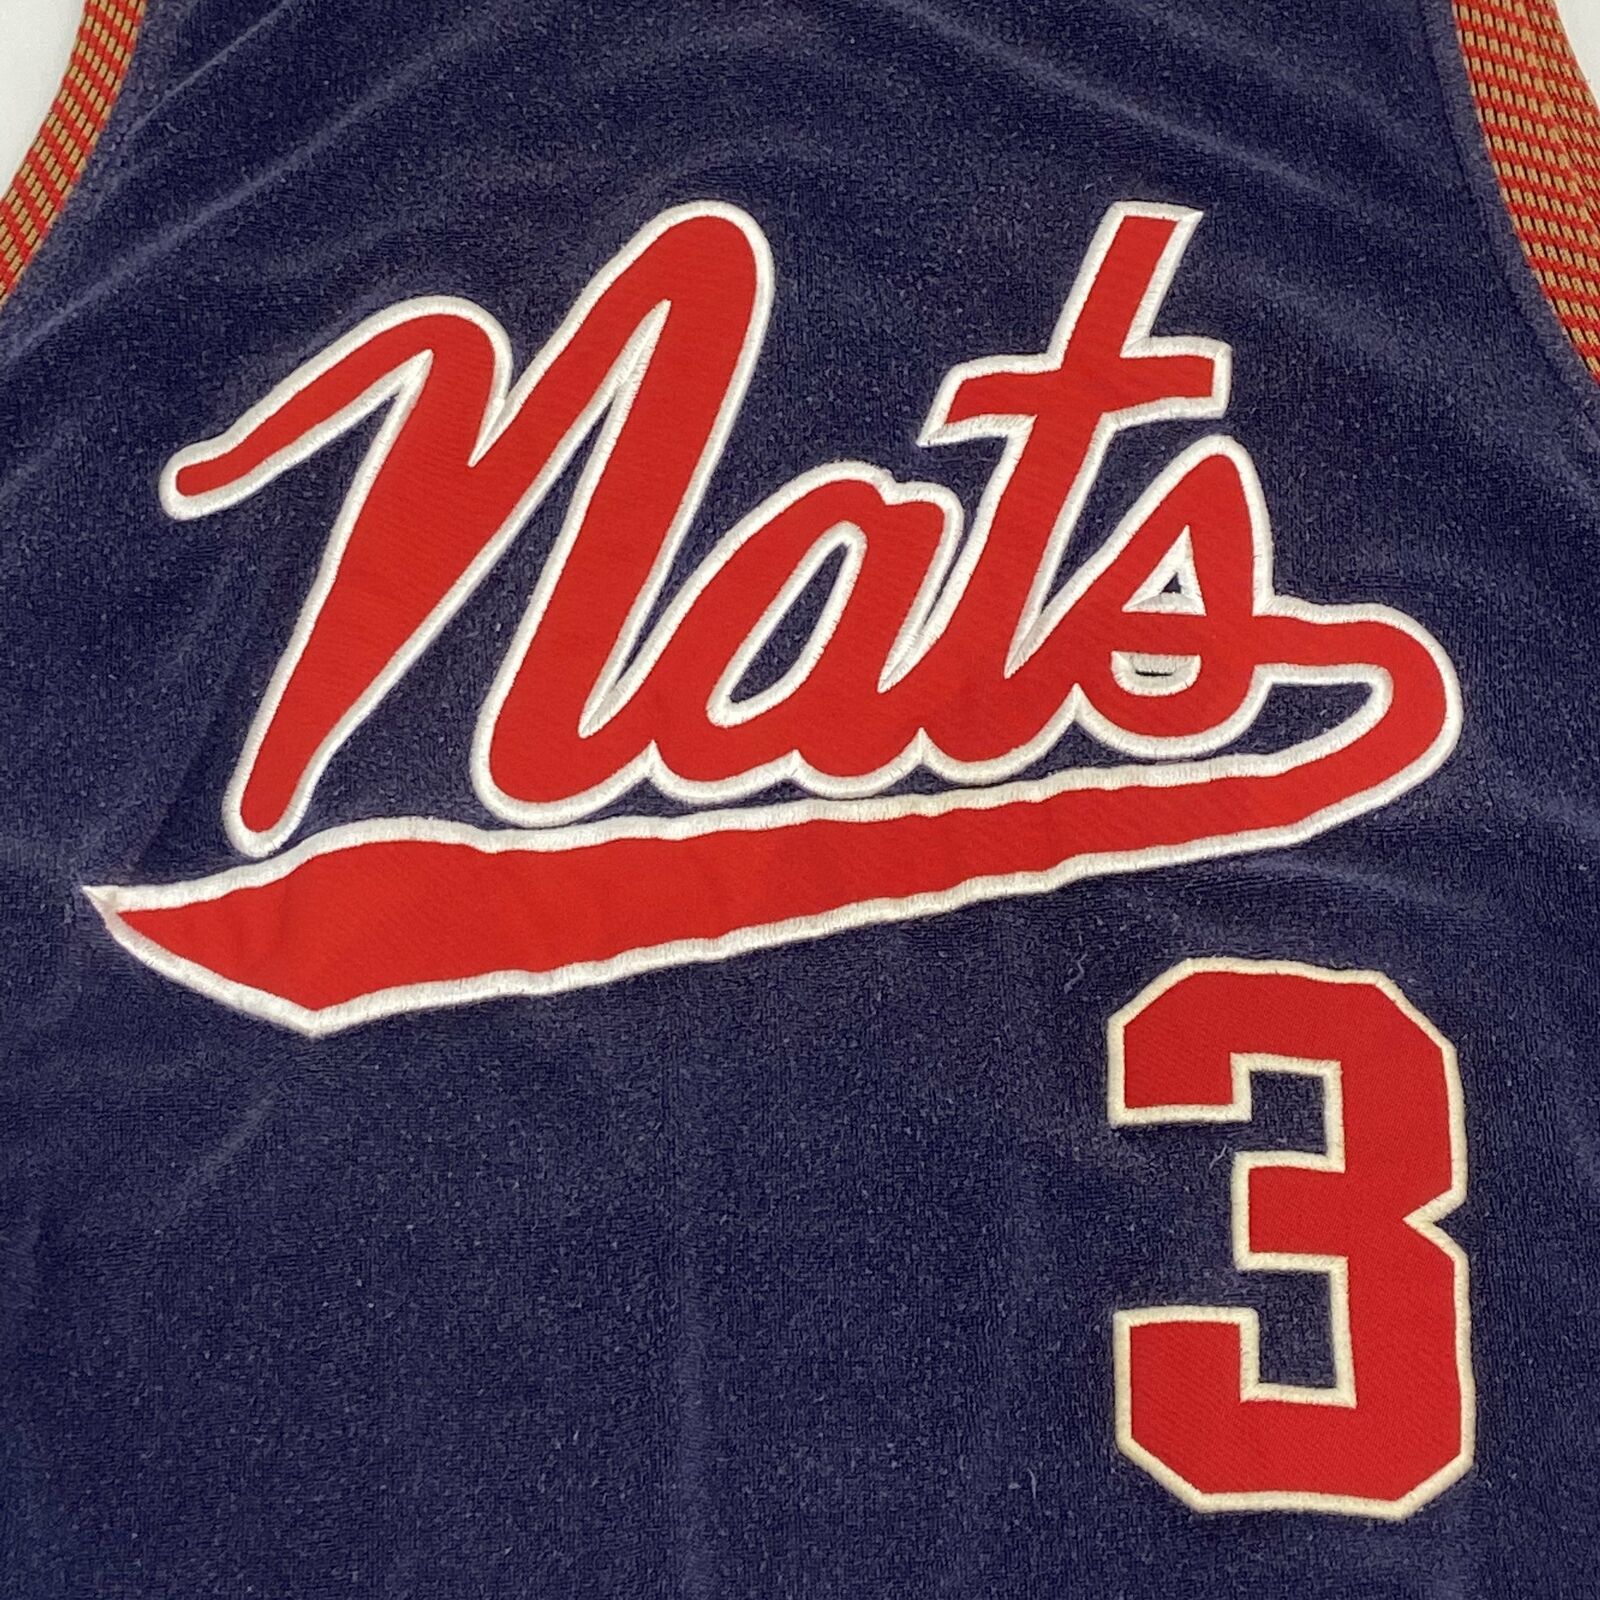 Mitchell & Ness - The classic 2004-05 Syracuse Nationals